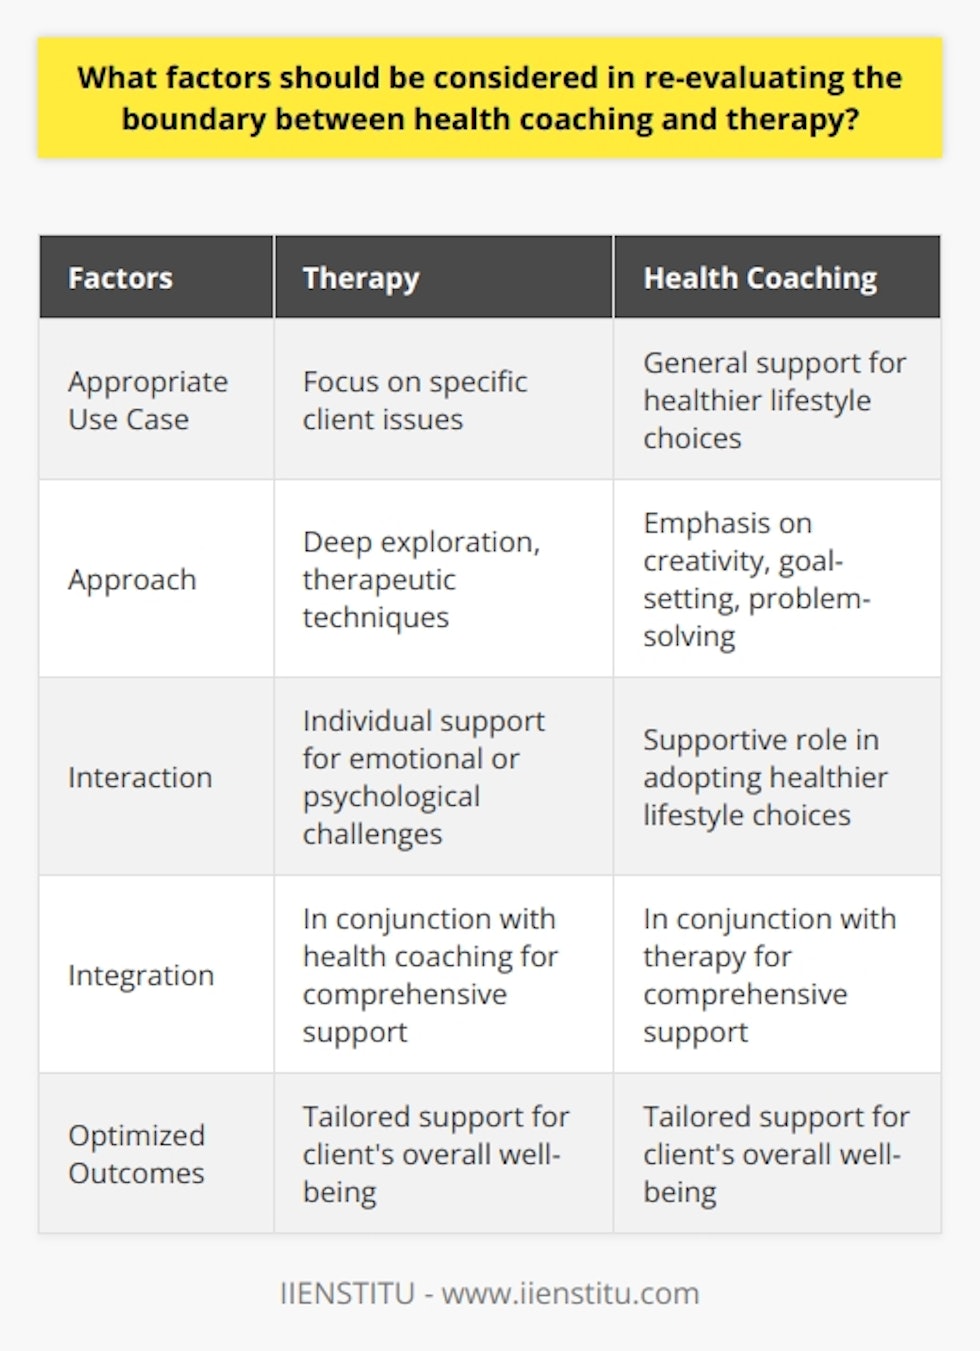 When re-evaluating the boundary between health coaching and therapy, it is crucial to consider several factors. One factor is distinguishing between the appropriate use case for each approach. Therapy is typically more intensive and focuses on specific issues that the client is facing, while health coaching tends to be more general and aims to help the client make healthier lifestyle choices. Recognizing the role of each approach and identifying their respective places within the larger framework is vital in determining how they can complement each other.Another factor to consider is the different approaches used by therapy and health coaching. Therapy often involves a deep exploration of the client's issues and utilizes specific therapeutic techniques, while health coaching frequently emphasizes creativity, goal-setting, and problem-solving. Understanding these distinct methods helps determine which approach is most suitable for each individual's needs and circumstances.Additionally, it is important to consider how therapy and health coaching should interact. There may be situations where both systems are appropriate for the same client. For instance, a health coach can assist the client in adopting healthier lifestyle choices, while a therapist can provide the necessary support to address specific emotional or psychological challenges. Understanding how the two approaches can work together ensures that the client receives the most effective and comprehensive support.In conclusion, re-evaluating the boundary between health coaching and therapy necessitates careful consideration of various factors. Understanding the appropriate use cases for each approach, the distinct methods utilized, and how they can be integrated to optimize client outcomes is essential. By taking these factors into account, professionals can better navigate the relationship between health coaching and therapy, ensuring that clients receive tailored and comprehensive support for their overall well-being.